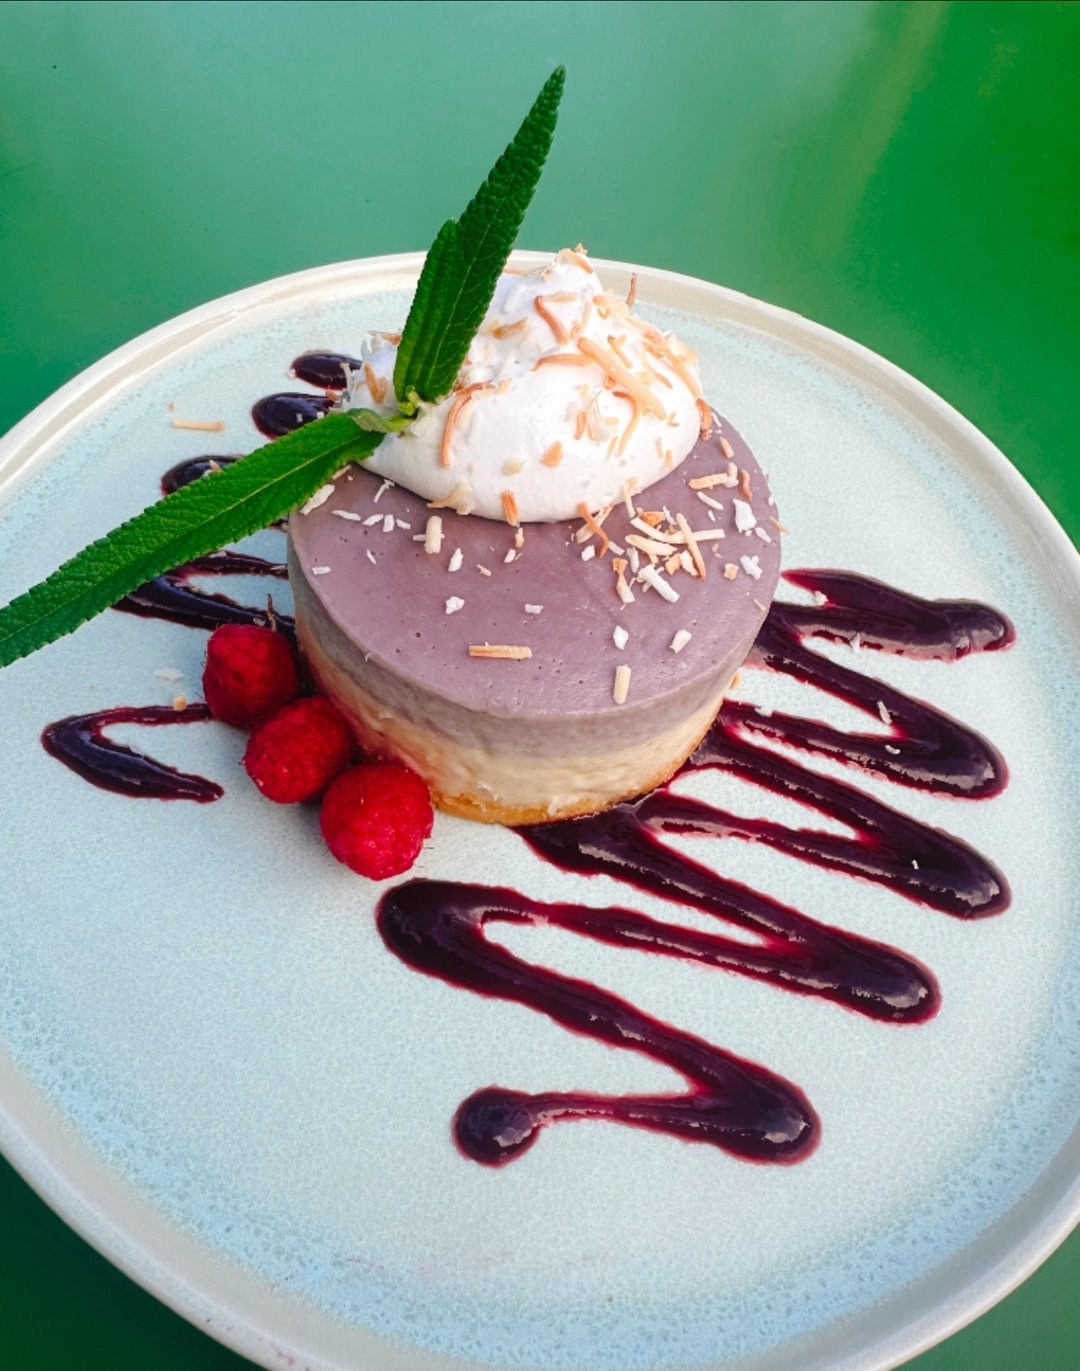 Indulge in our new vegan berry cashew cheesecake served with coconut cream, toasted coconut and berry coulis. 🥥